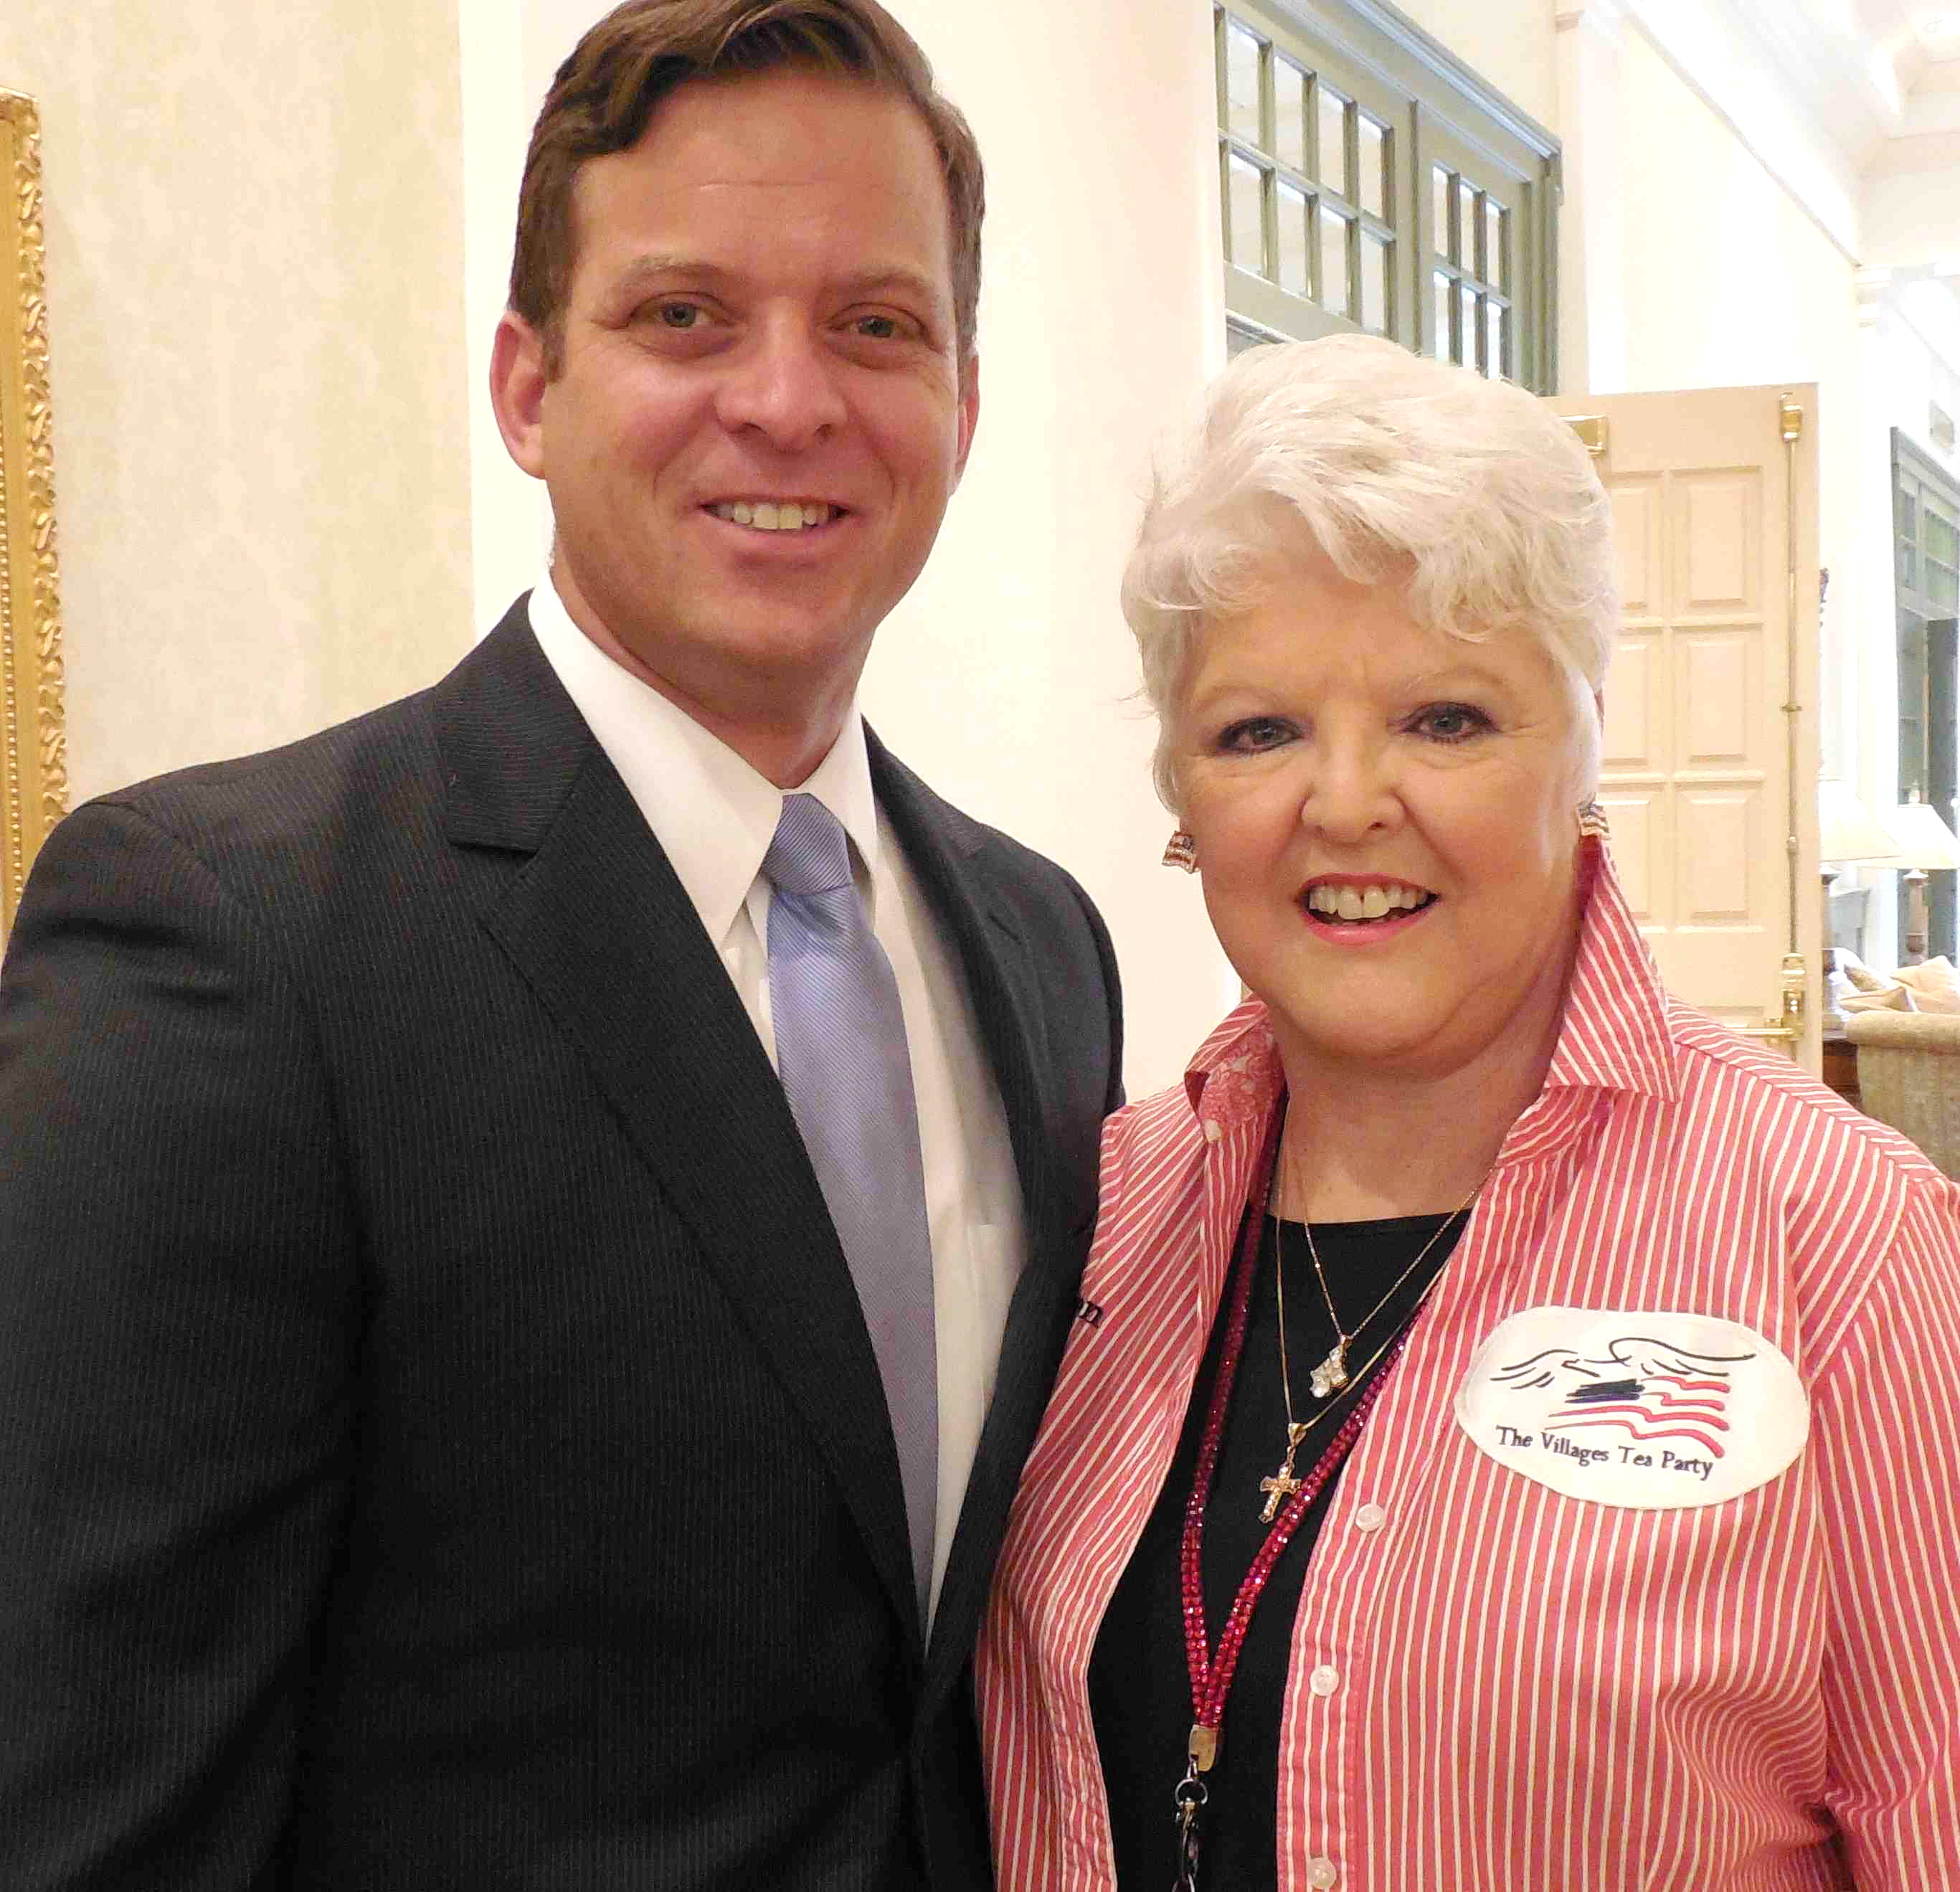 Lieutenant governor energizes members of The Villages Tea Party